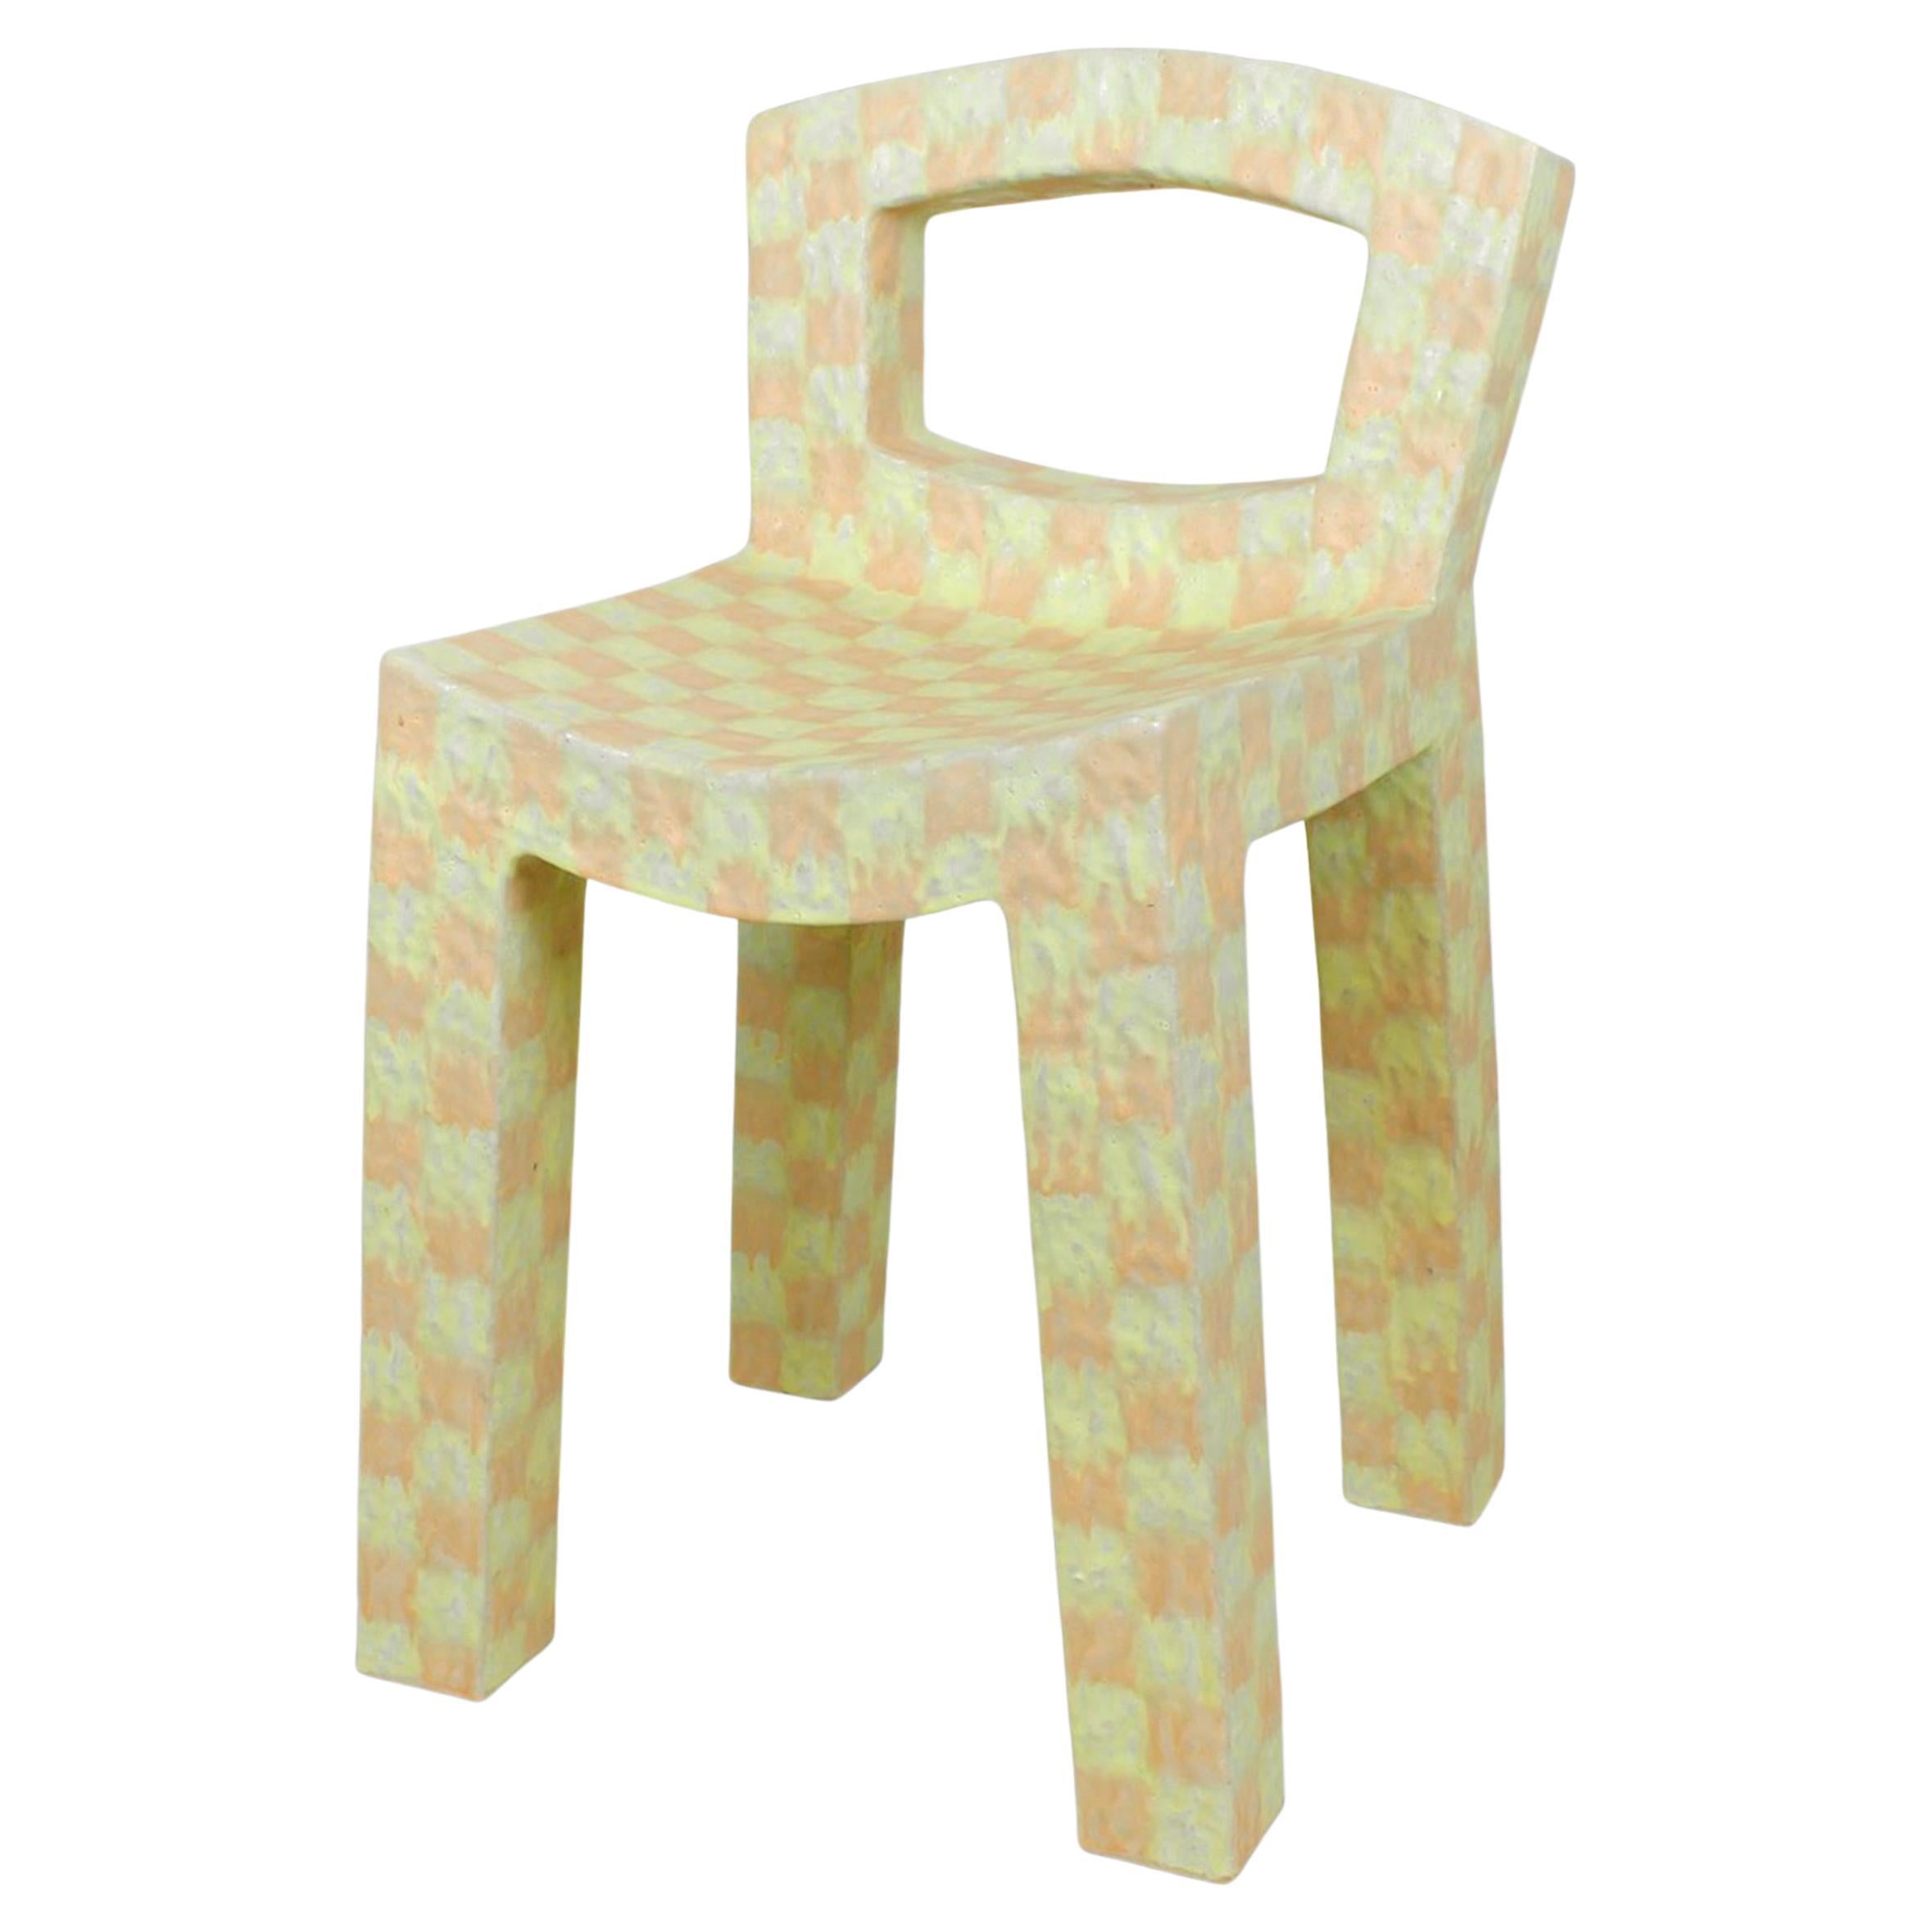 Checkered A-Chair, Kelsie Rudolph, Represented by Tuleste Factory